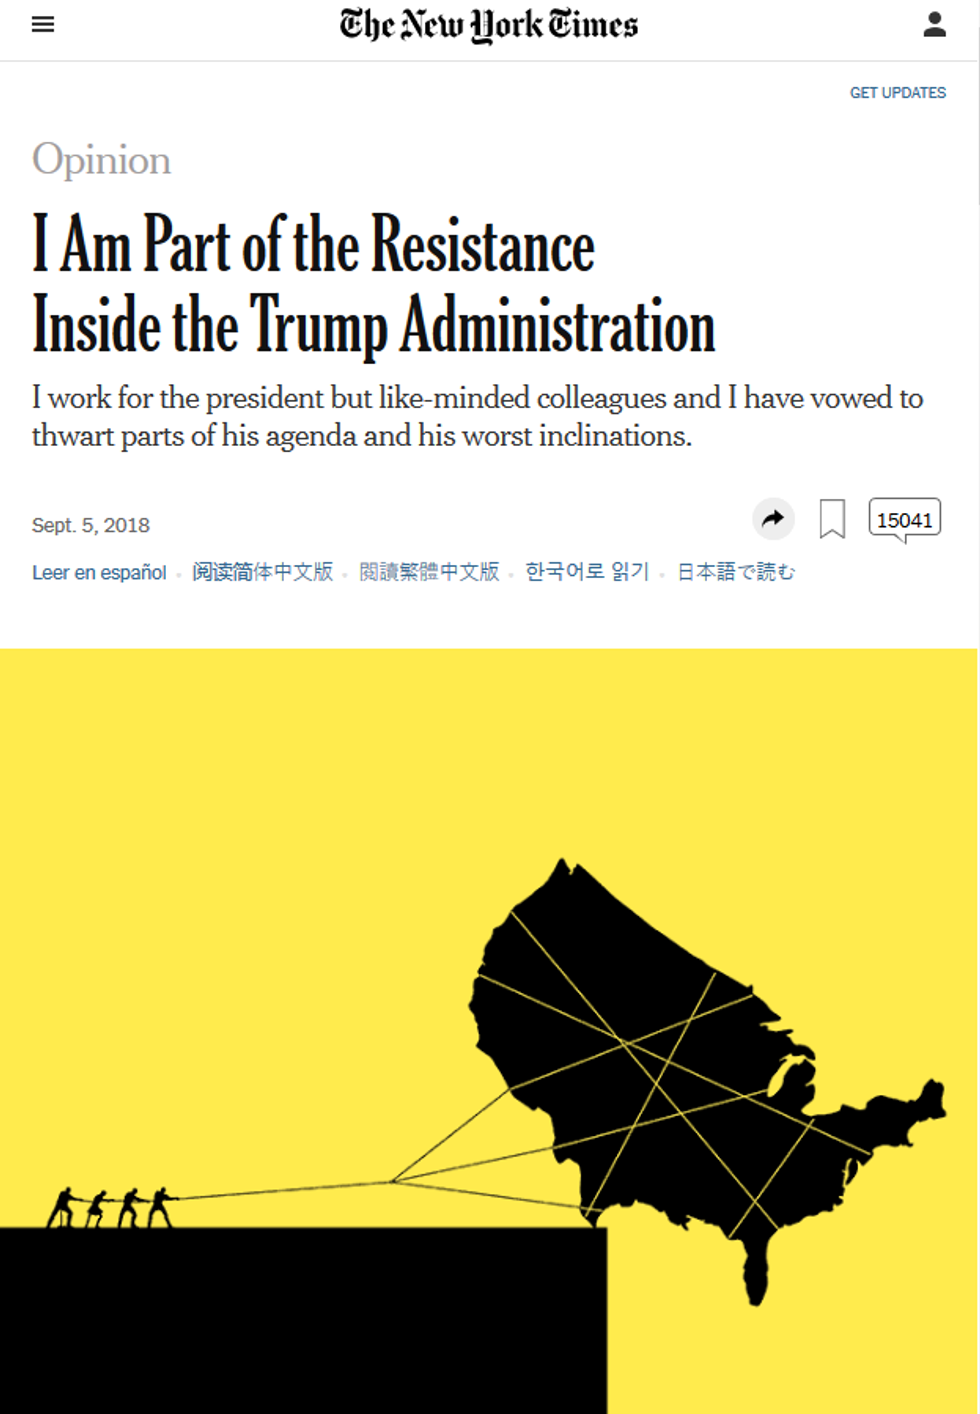 NYT: I Am Part of the Resistance Inside the Trump Administration